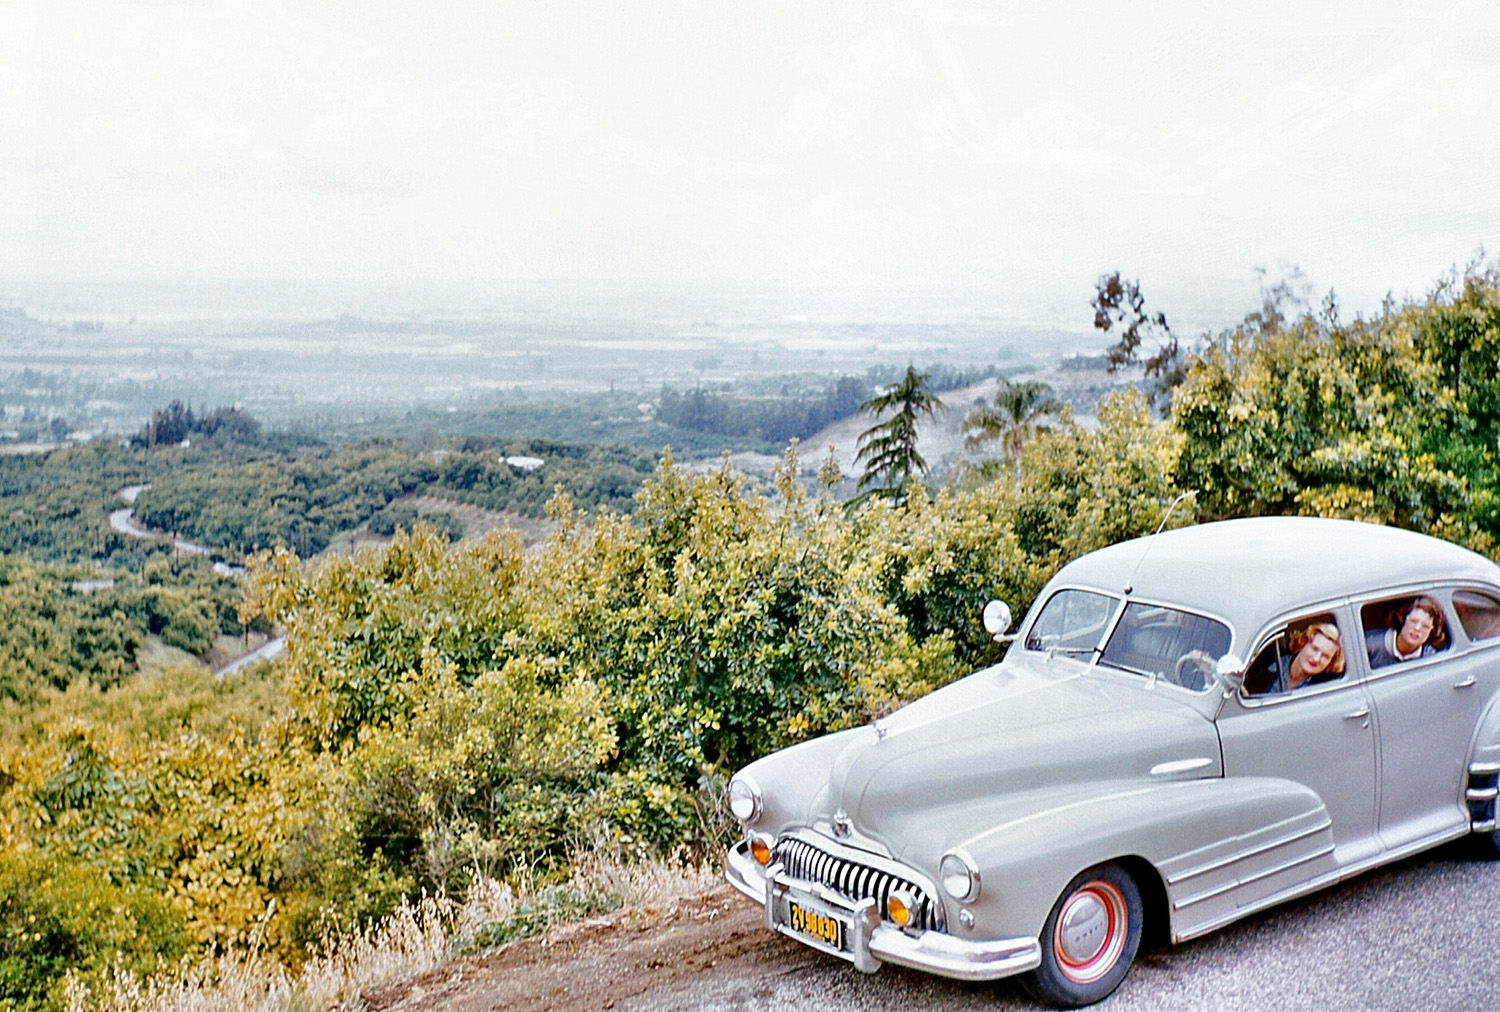 March, 1955. Cruising somewhere in the La Habra Heights, Orange County, Calif. My mom behind the wheel, neighbor in the back seat. View full size.